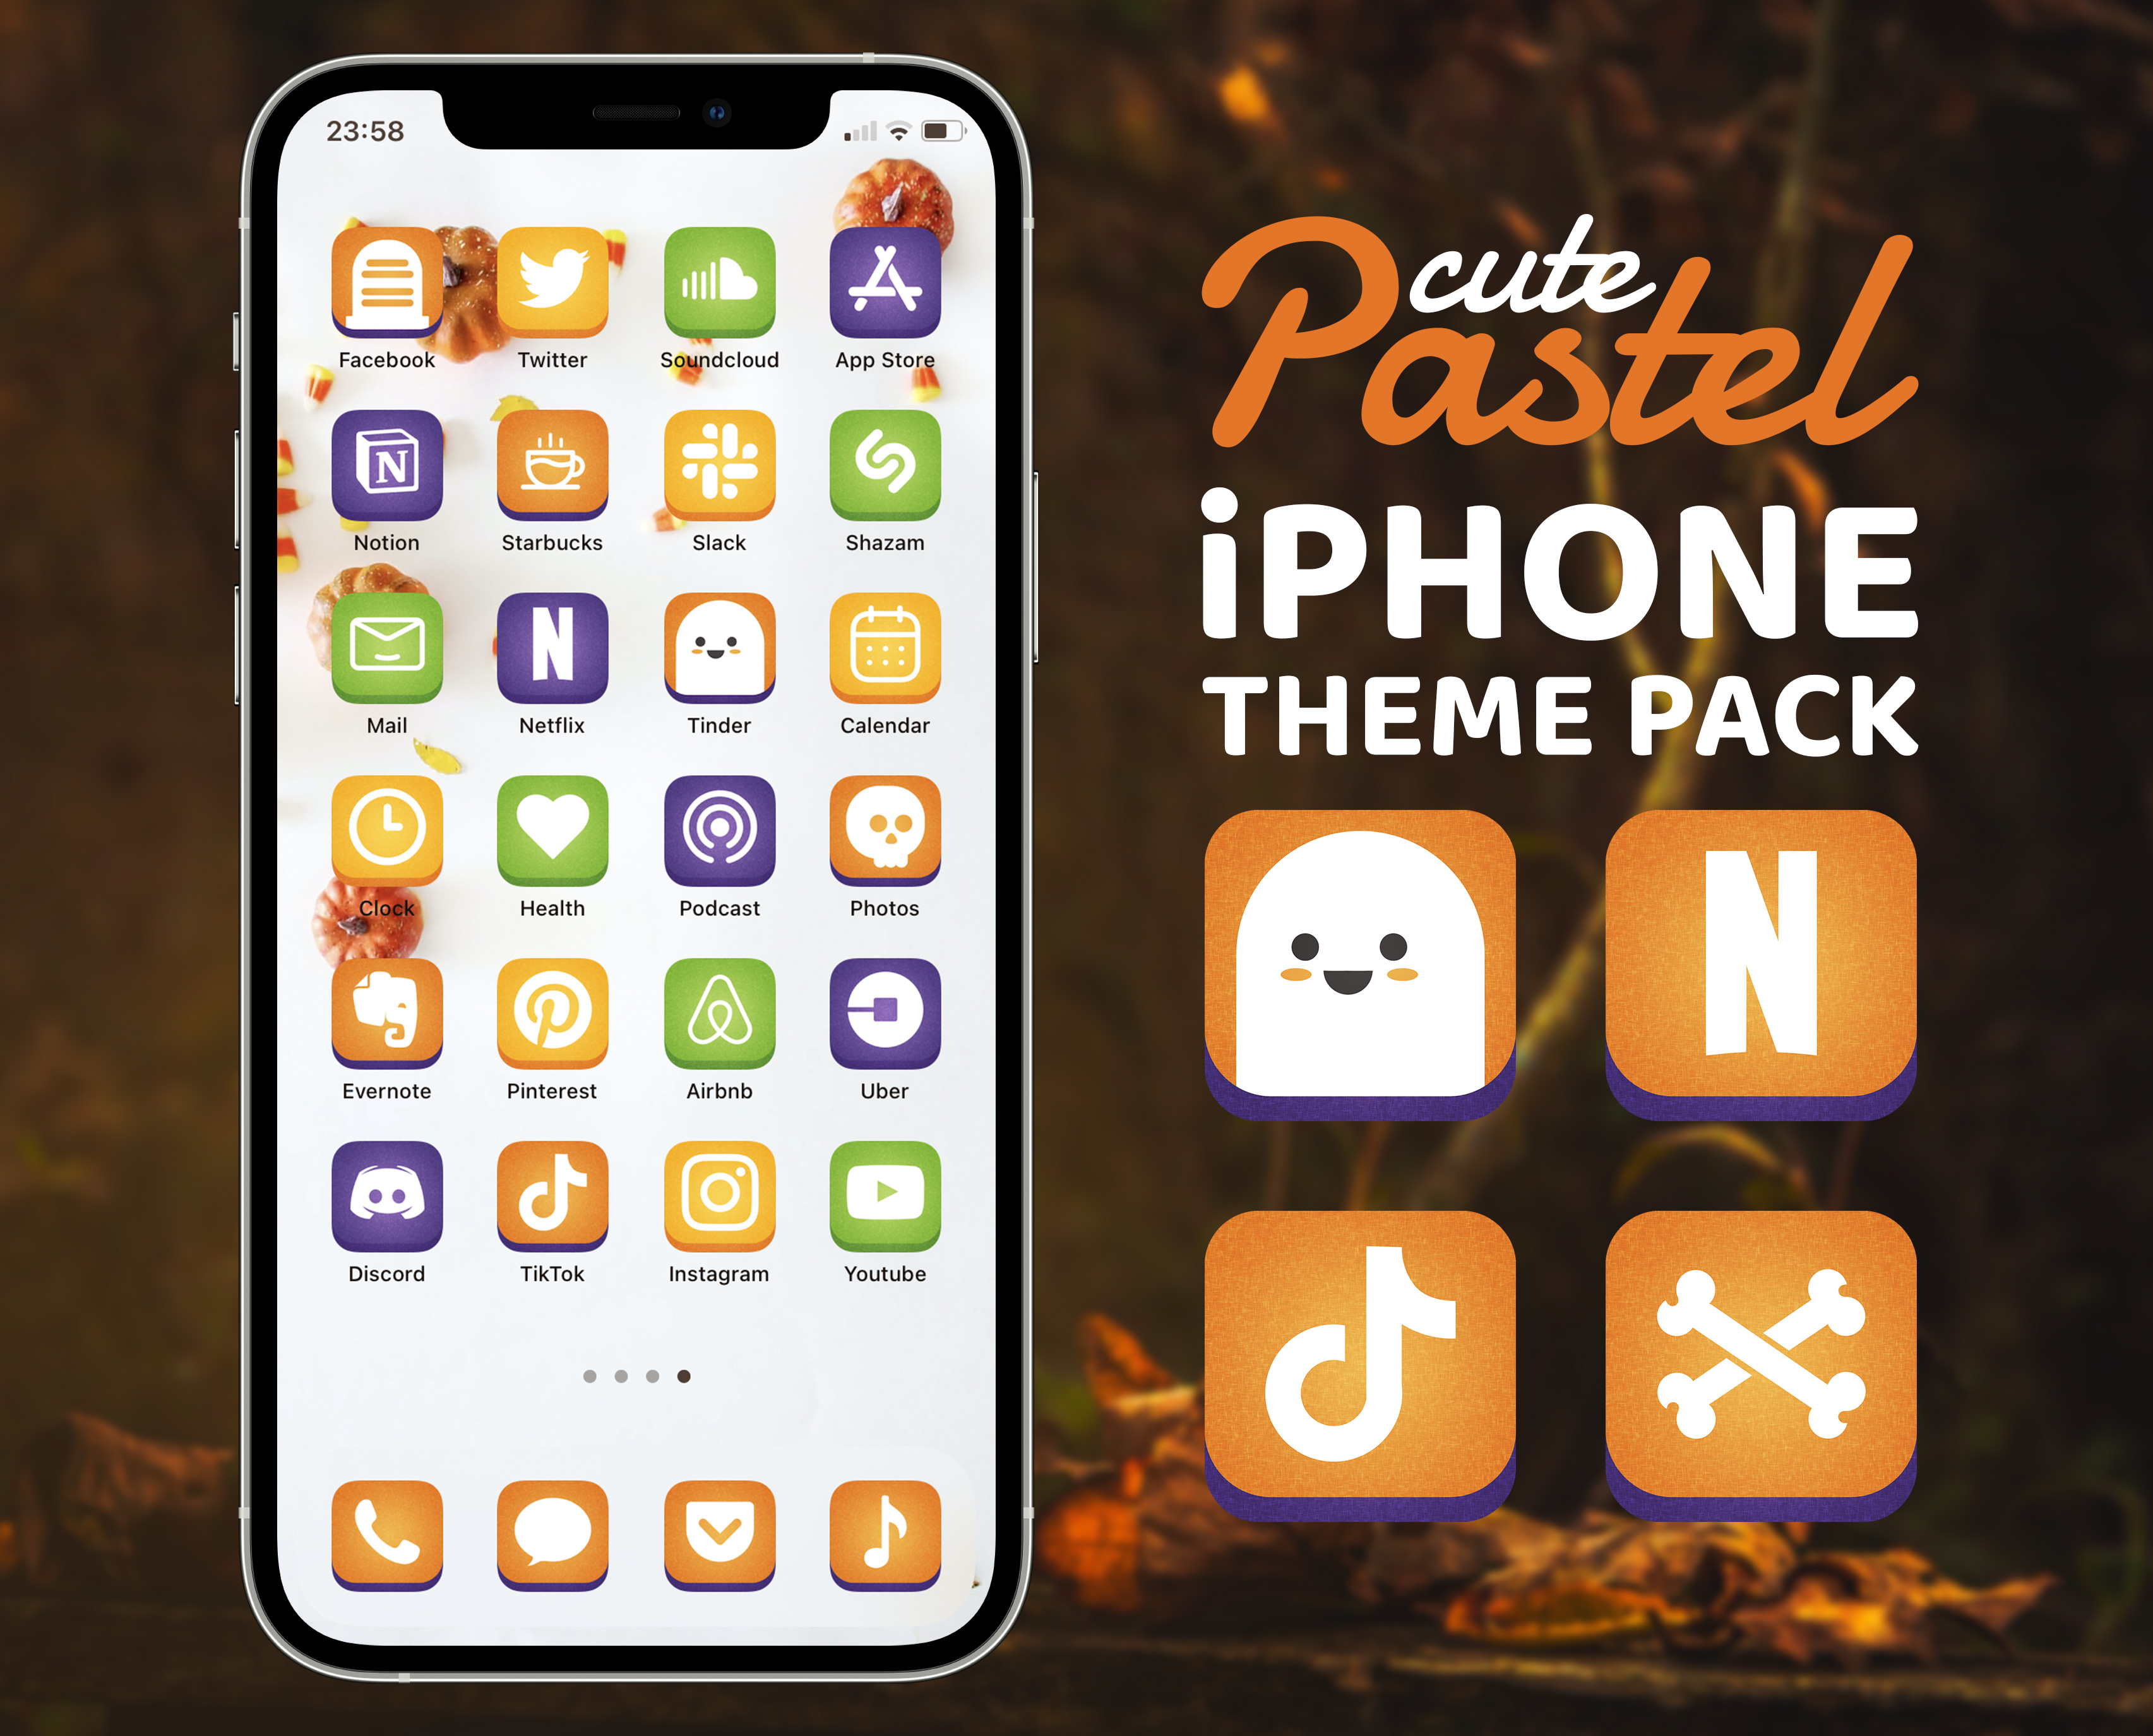 Pinicon Pastel App Icons Ios 15 Home Screen Ideas Iphone Theme Pack Includes 400 Aesthetic App Icons 24 Photo Widgets 12 Light Amp Dark Wallpapers Give